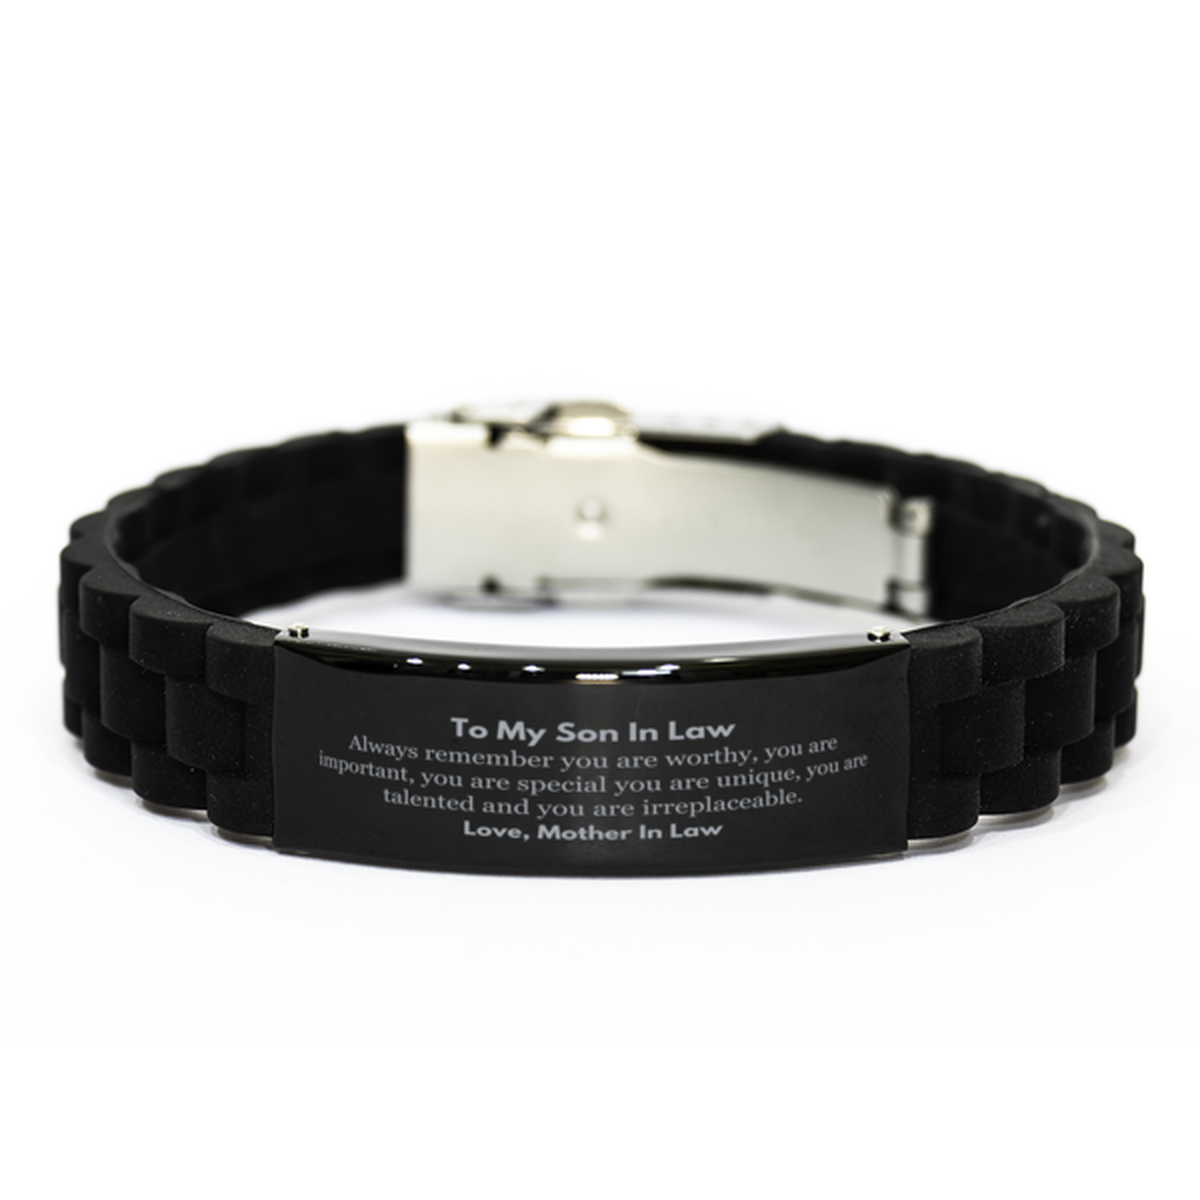 Son In Law Birthday Gifts from Mother In Law, Inspirational Black Glidelock Clasp Bracelet for Son In Law Christmas Graduation Gifts for Son In Law Always remember you are worthy, you are important. Love, Mother In Law